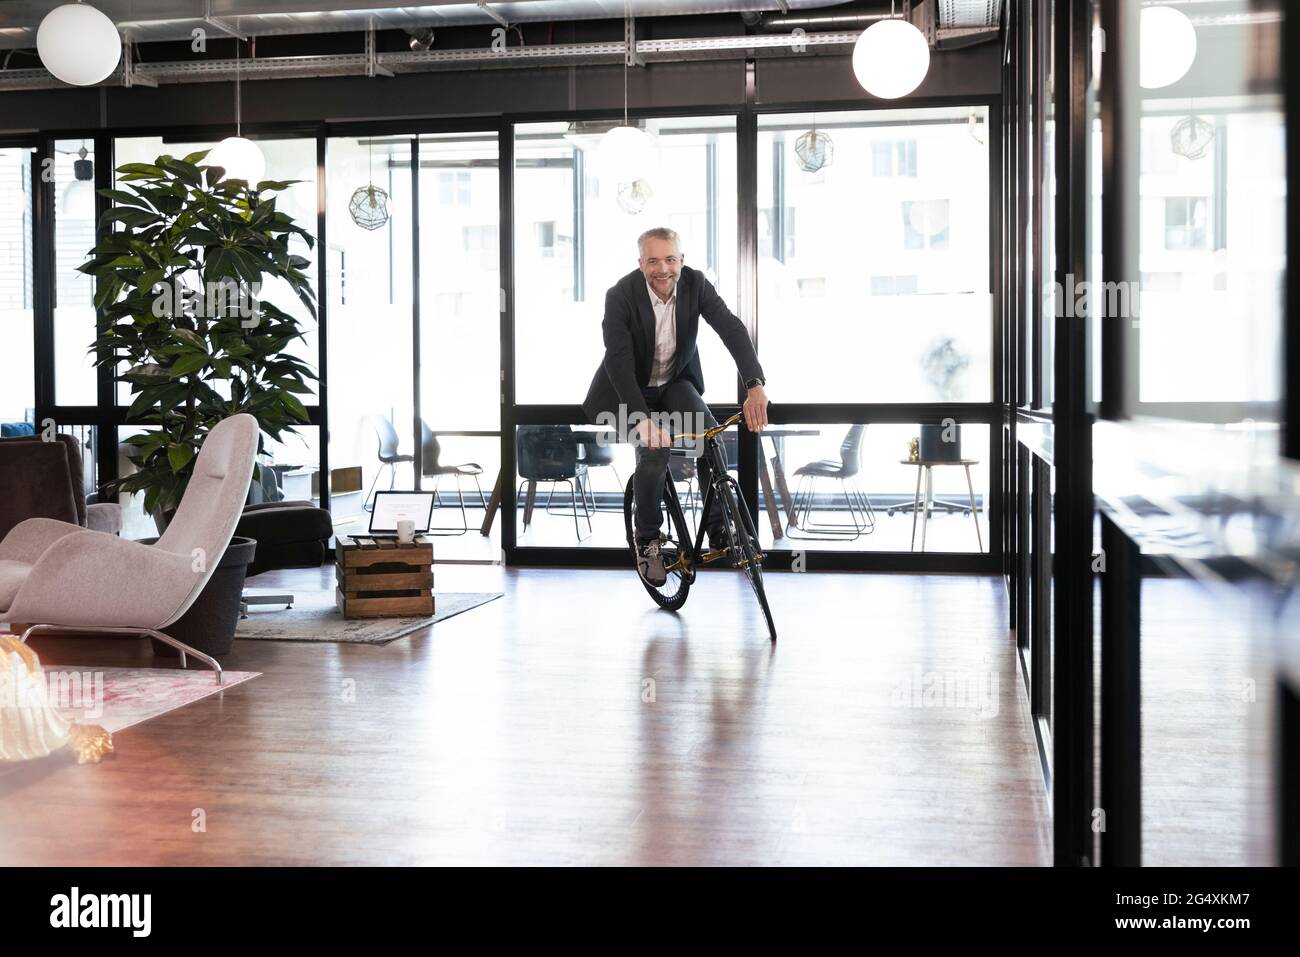 Smiling businessman cycling in office Stock Photo